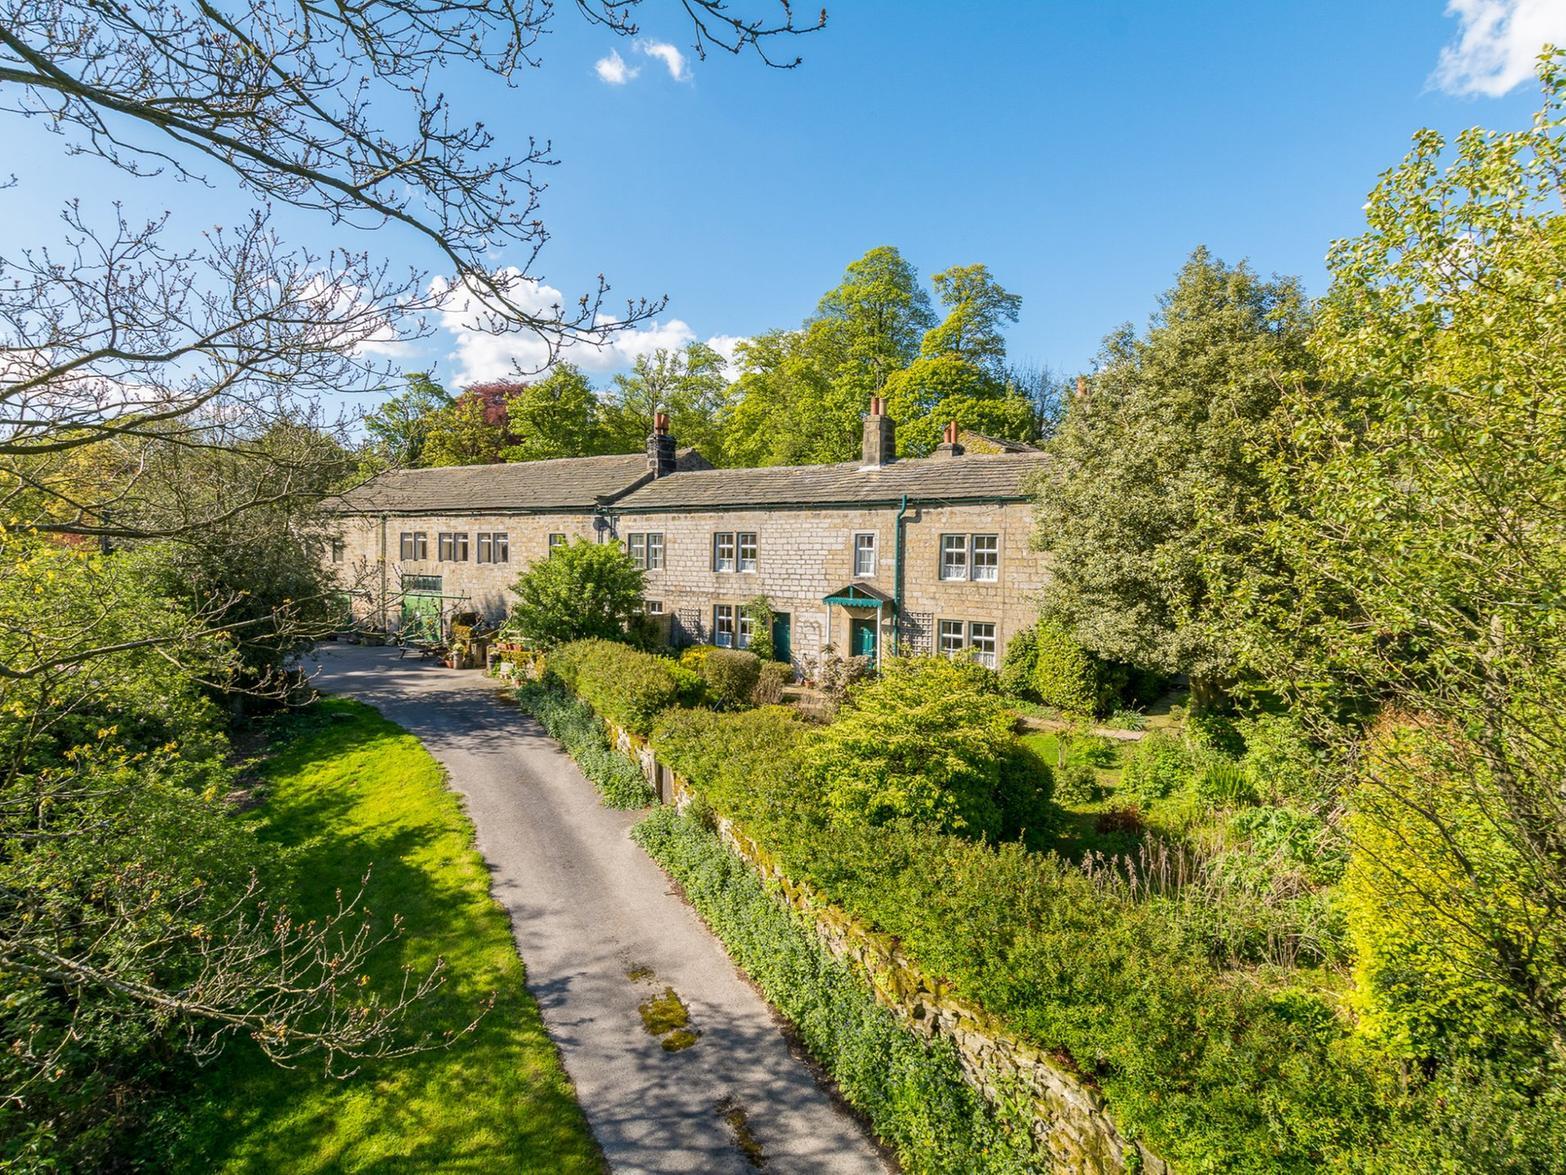 The property consists of two existing dwellings being two and three bedroom respectively which are Grade II listed. They are attached to the former sawmill where planning permission has recently been granted for two No dwellings.